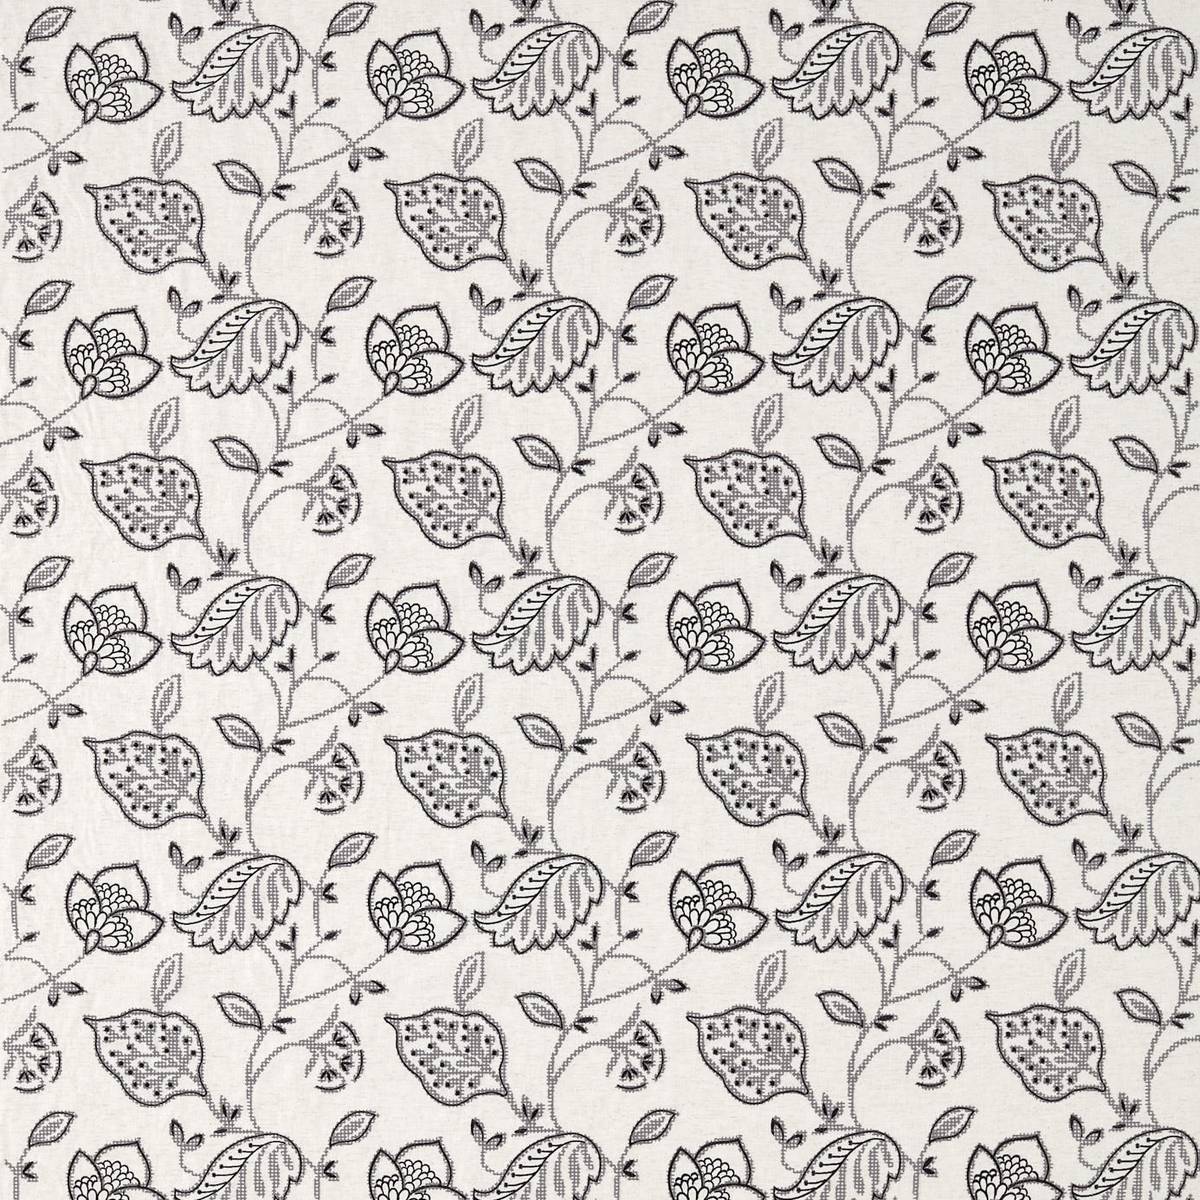 Potton Wood Charcoal Fabric by Sanderson